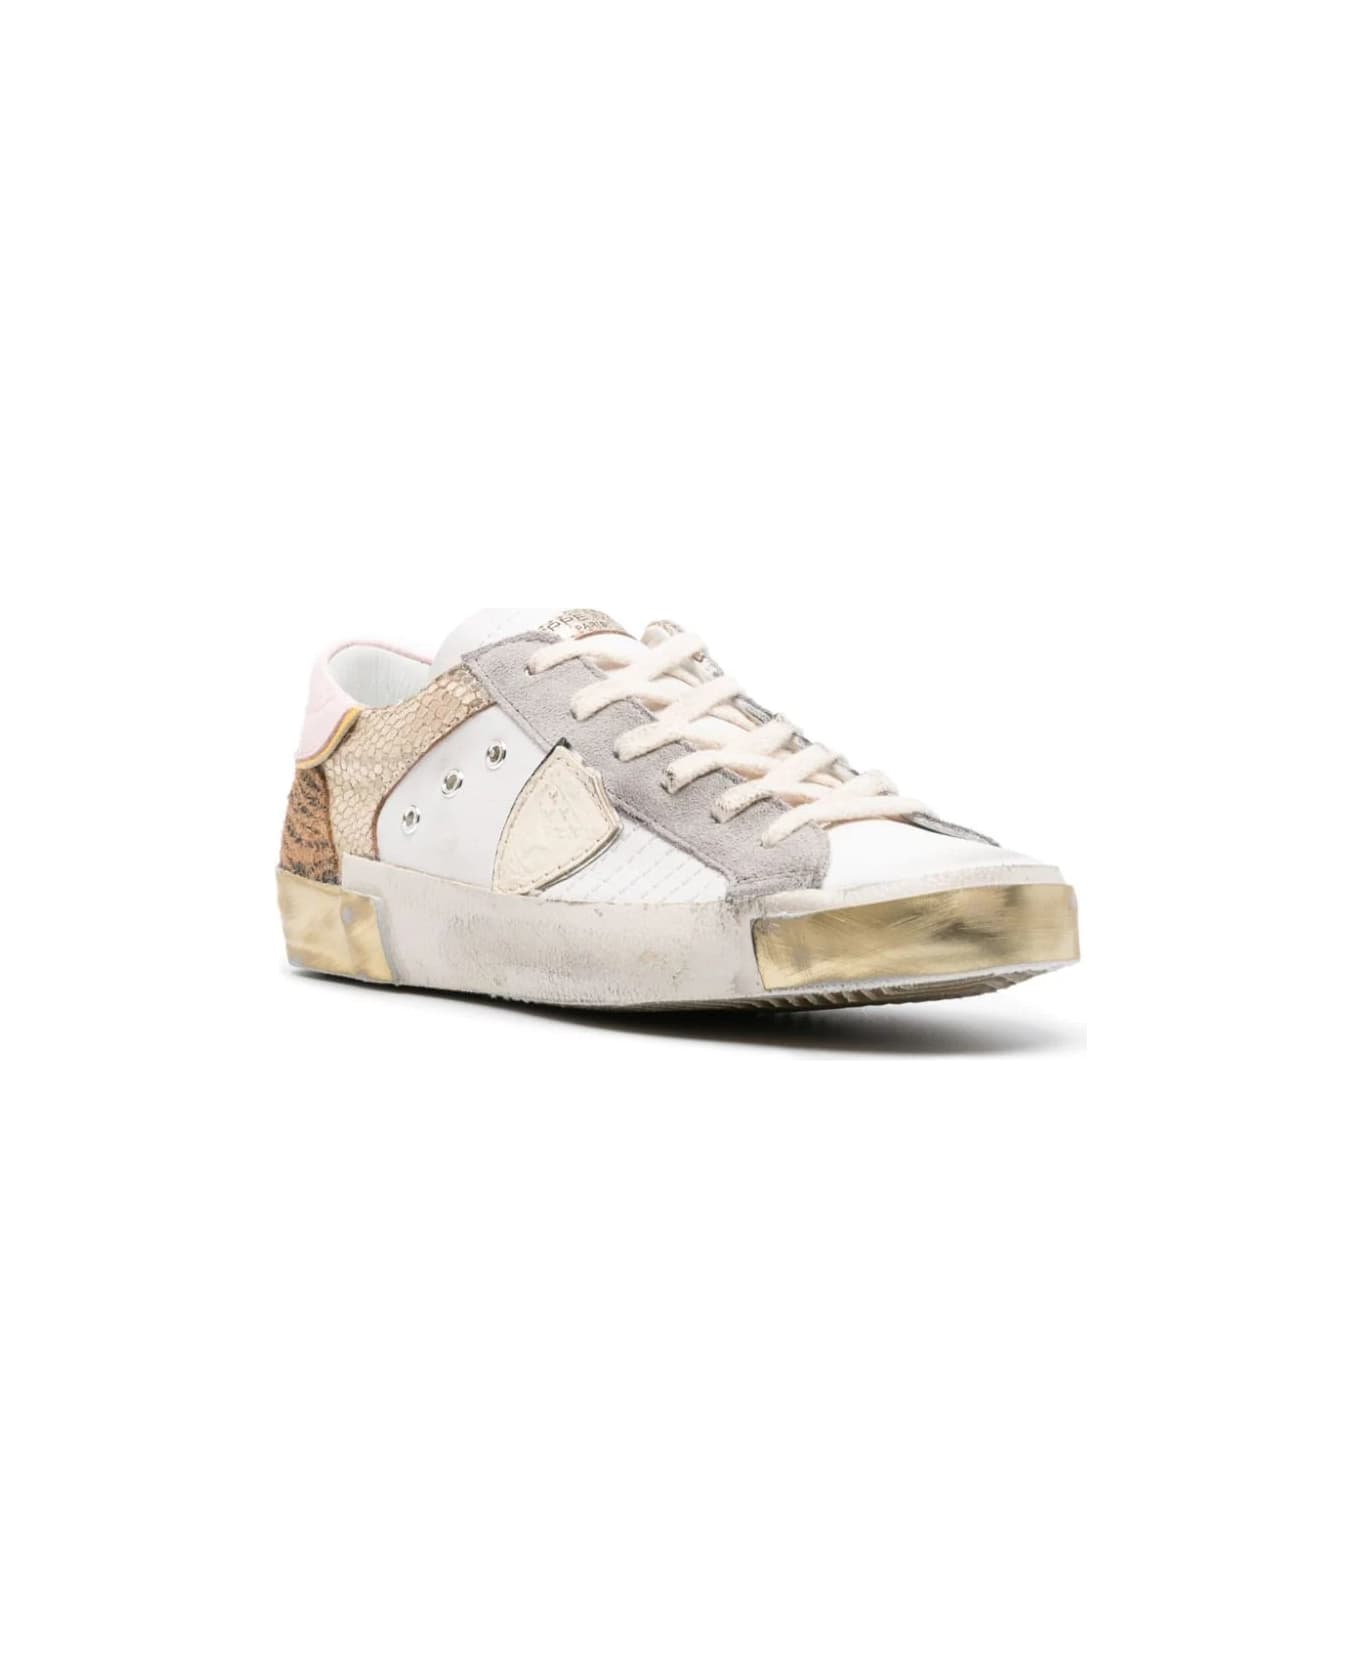 Philippe Model Prsx Low Sneakers - White, Animalier And Gold スニーカー